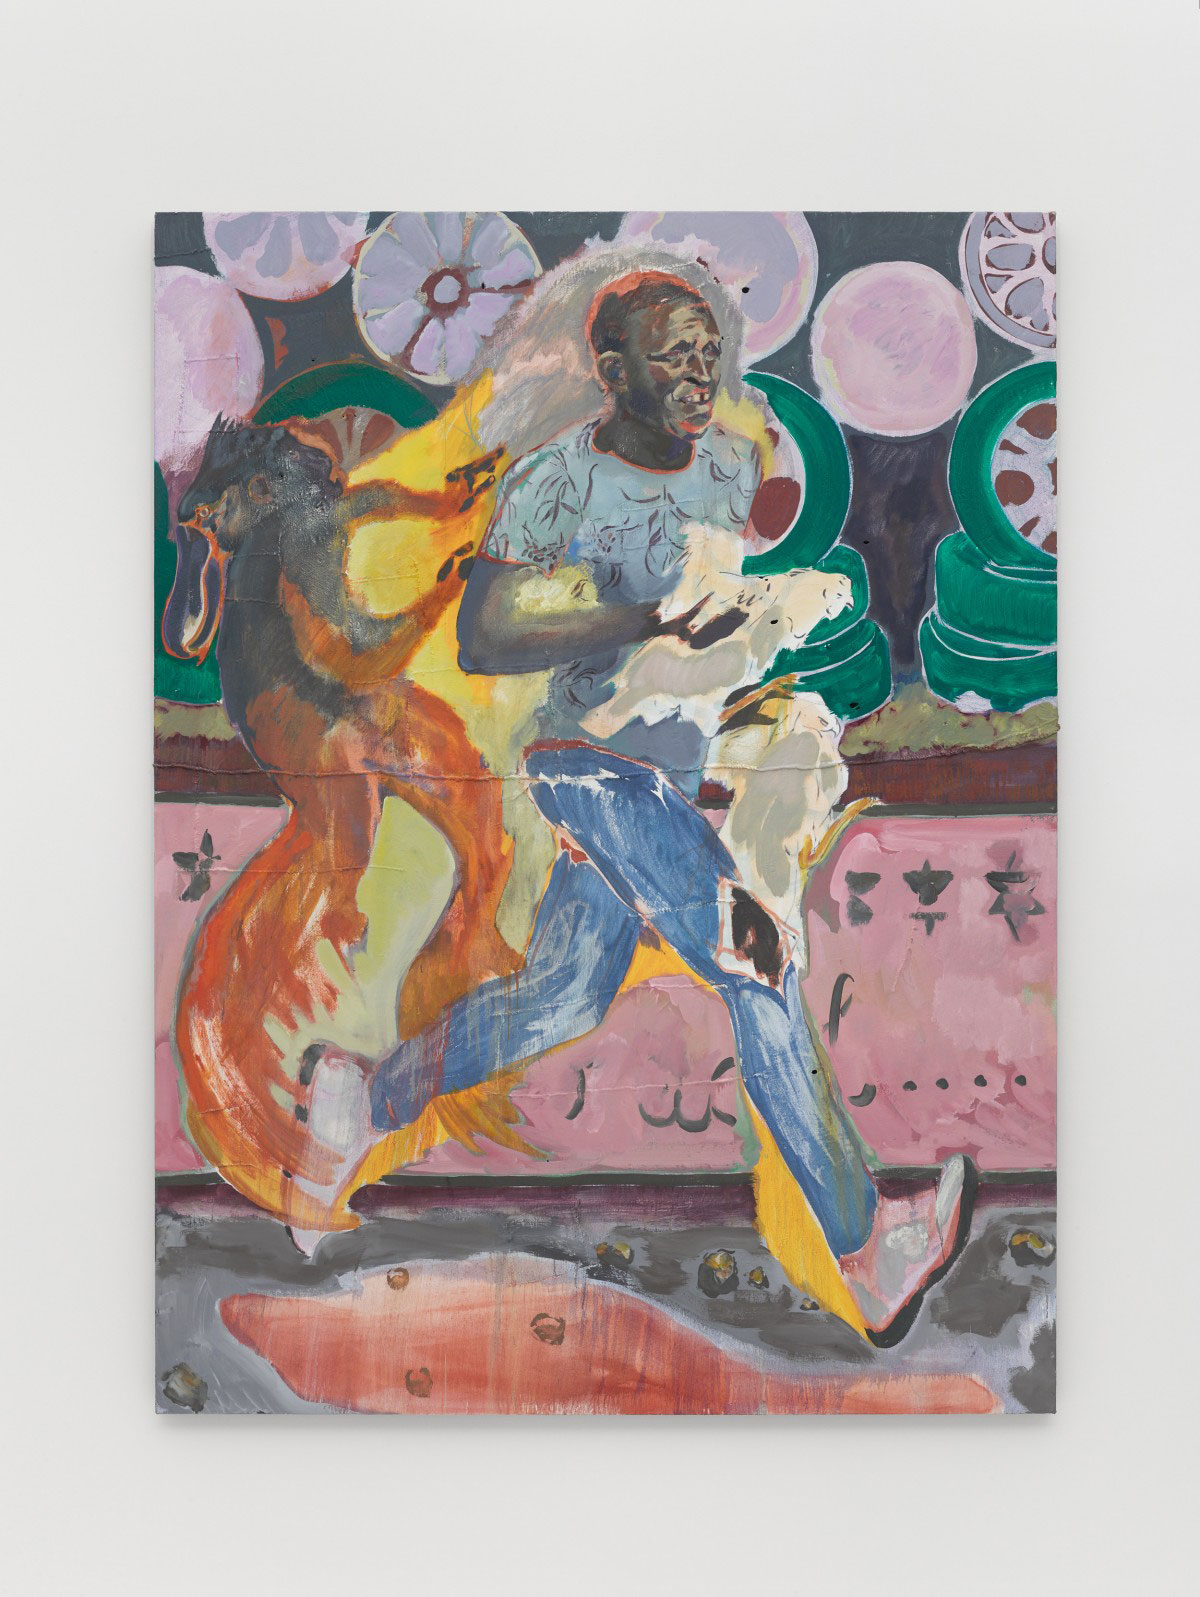 The Wick - The Chicken Thief, Michael Armitage, 2019